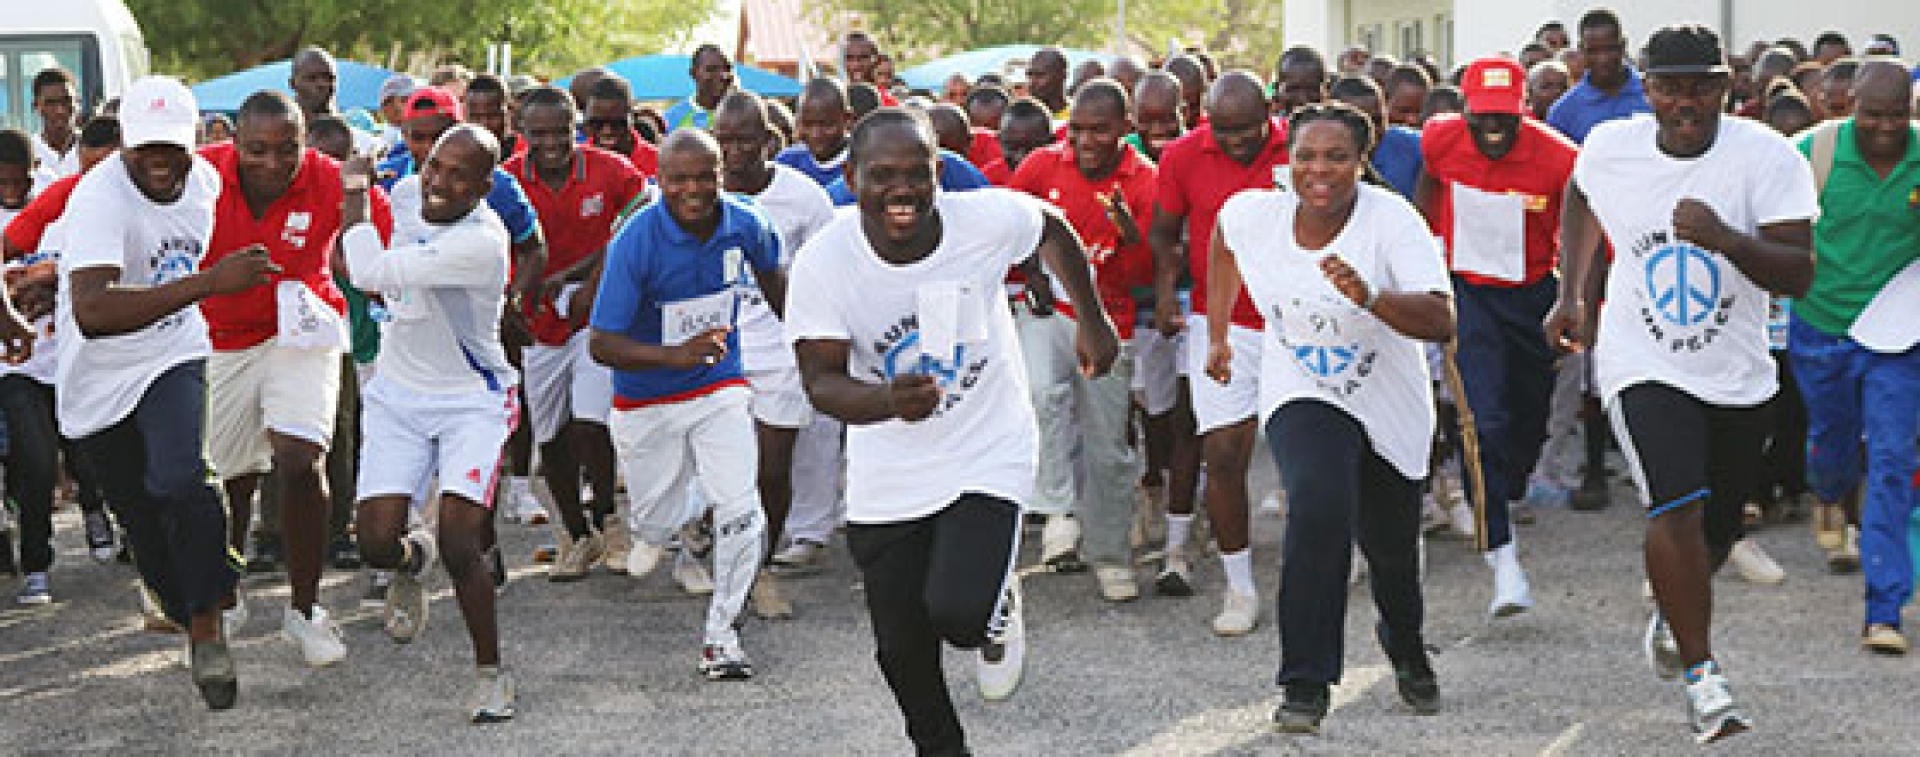 AUN Community in Run for Peace to Raise Funds for Feed and Read Program